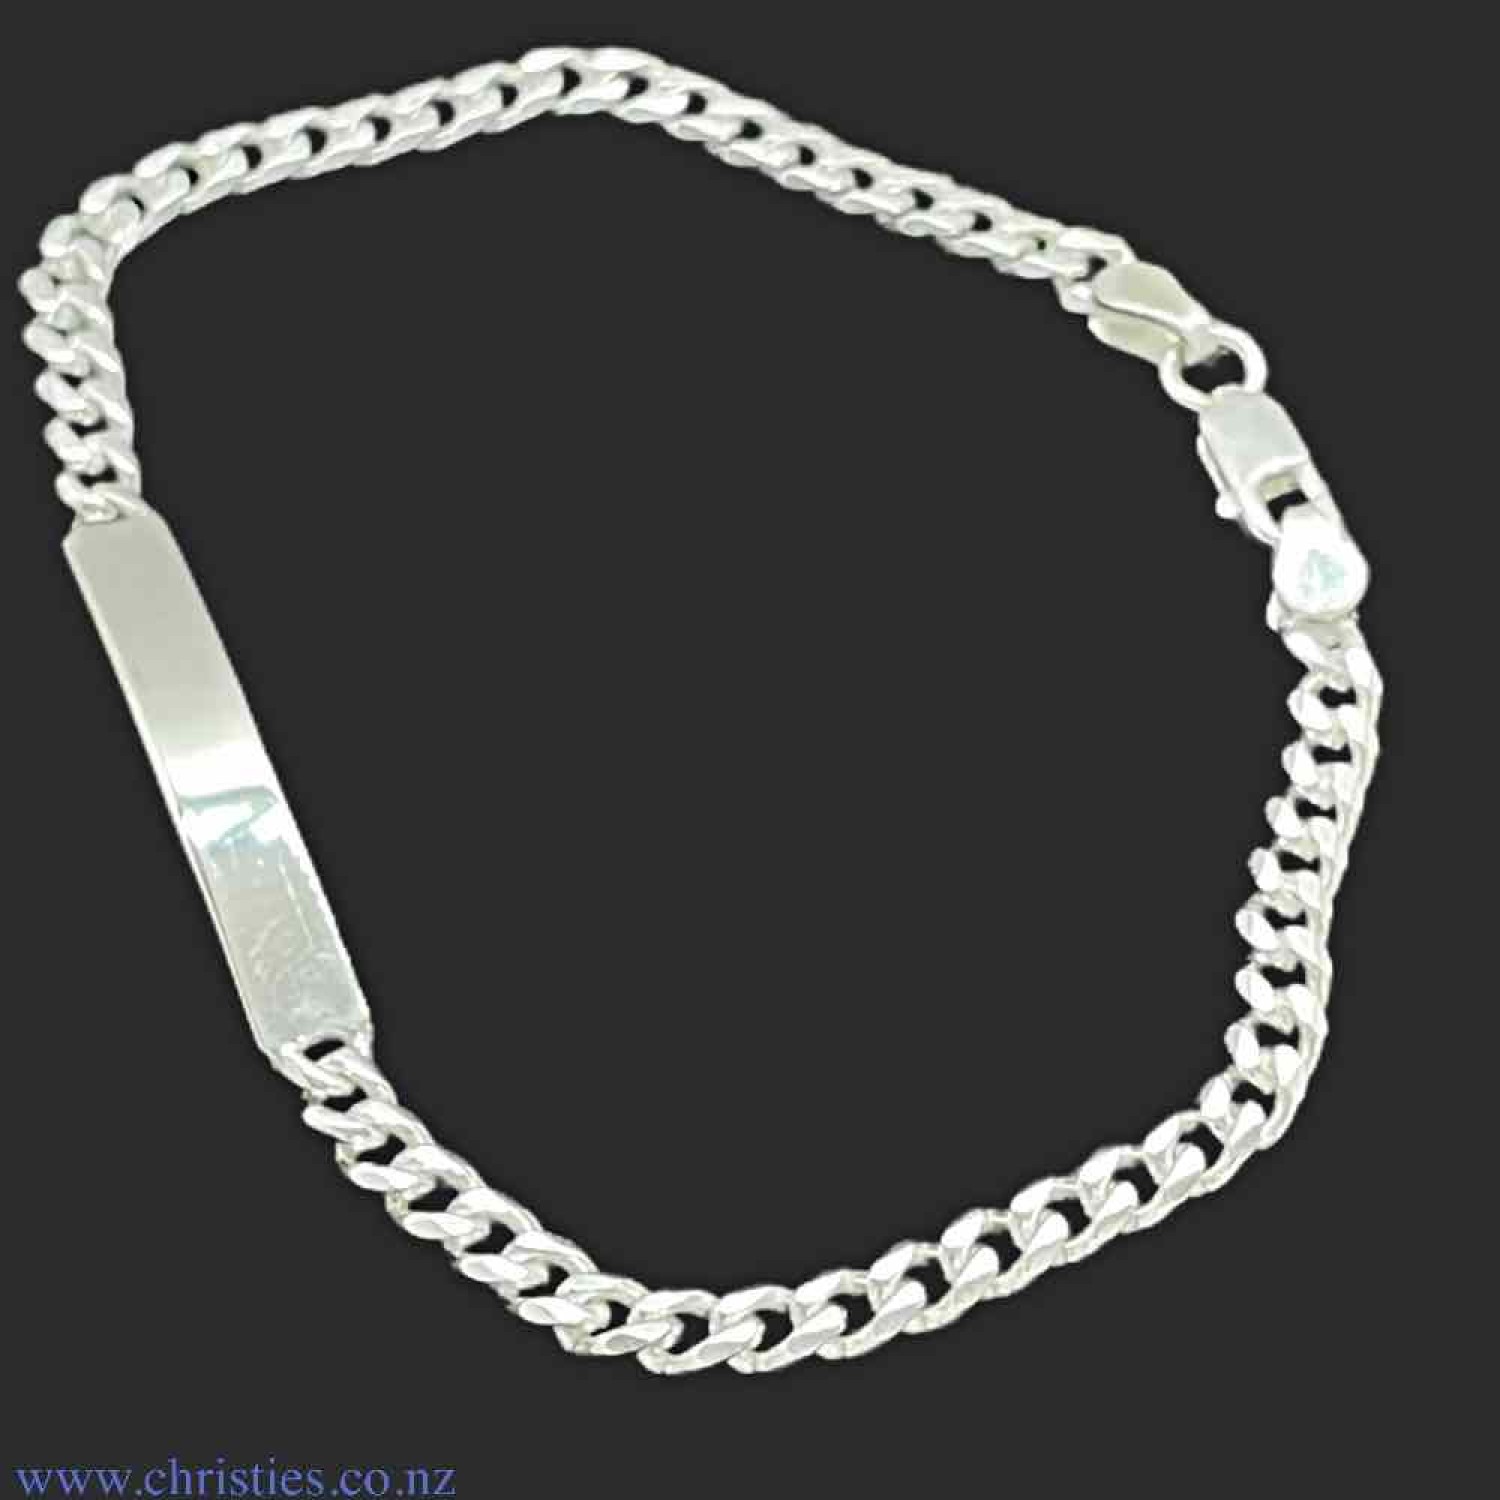 IDCD120H6C21 Sterling Silver ID Curb Link Bracelet. Lightweight  Identification bracelet crafted in 925 sterling silver  Afterpay - Split your purchase into 4 instalments - Pay for your purchase over 4 instalments, due every two weeks. You’ll pay y @chris